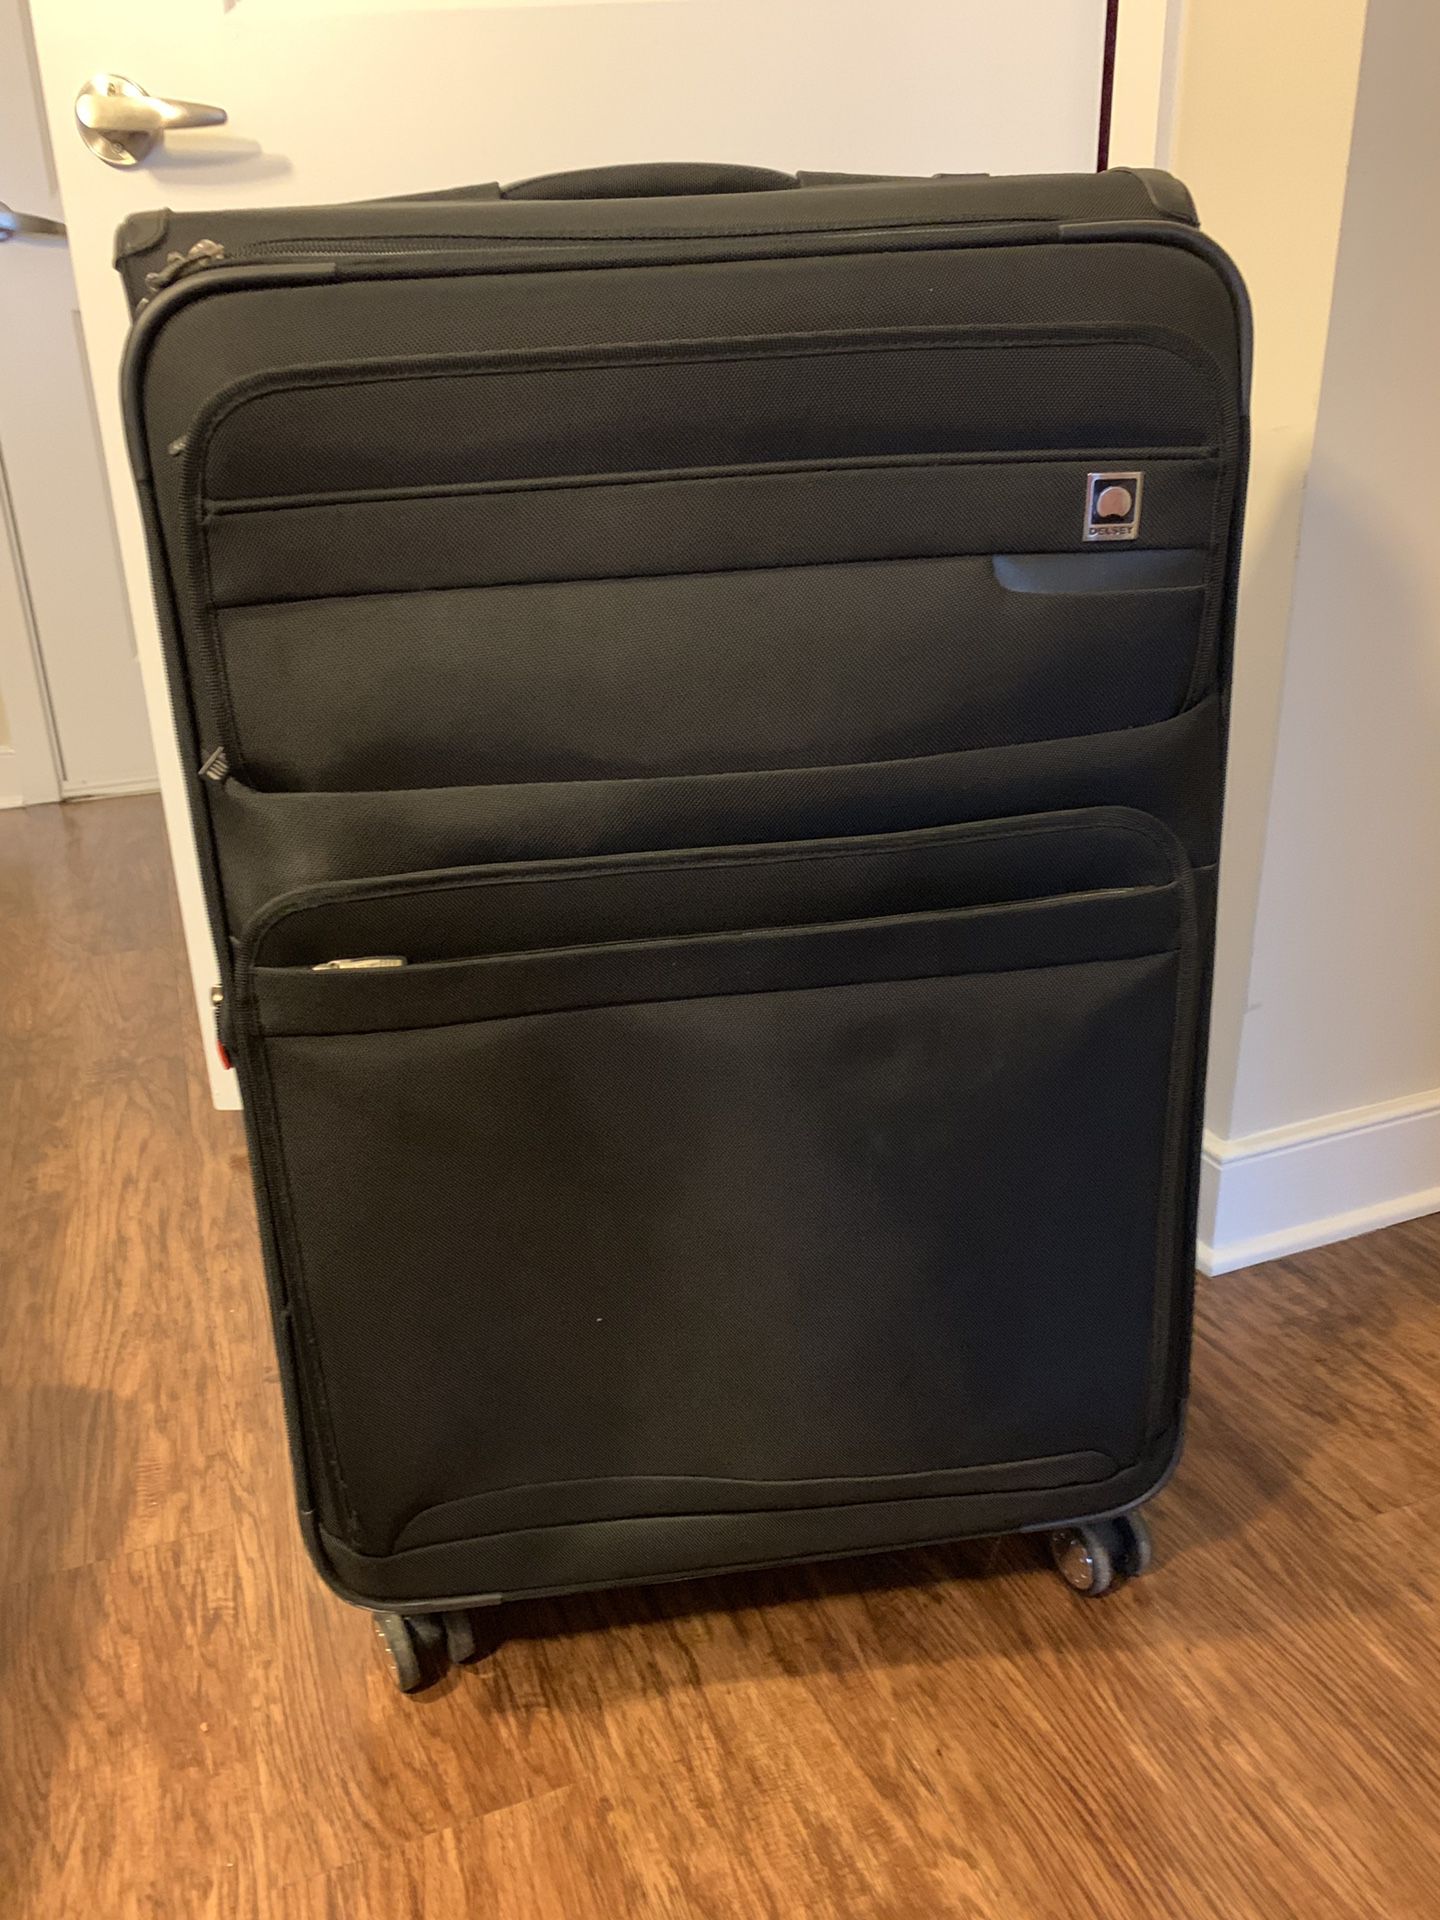 Large Delsey luggage piece